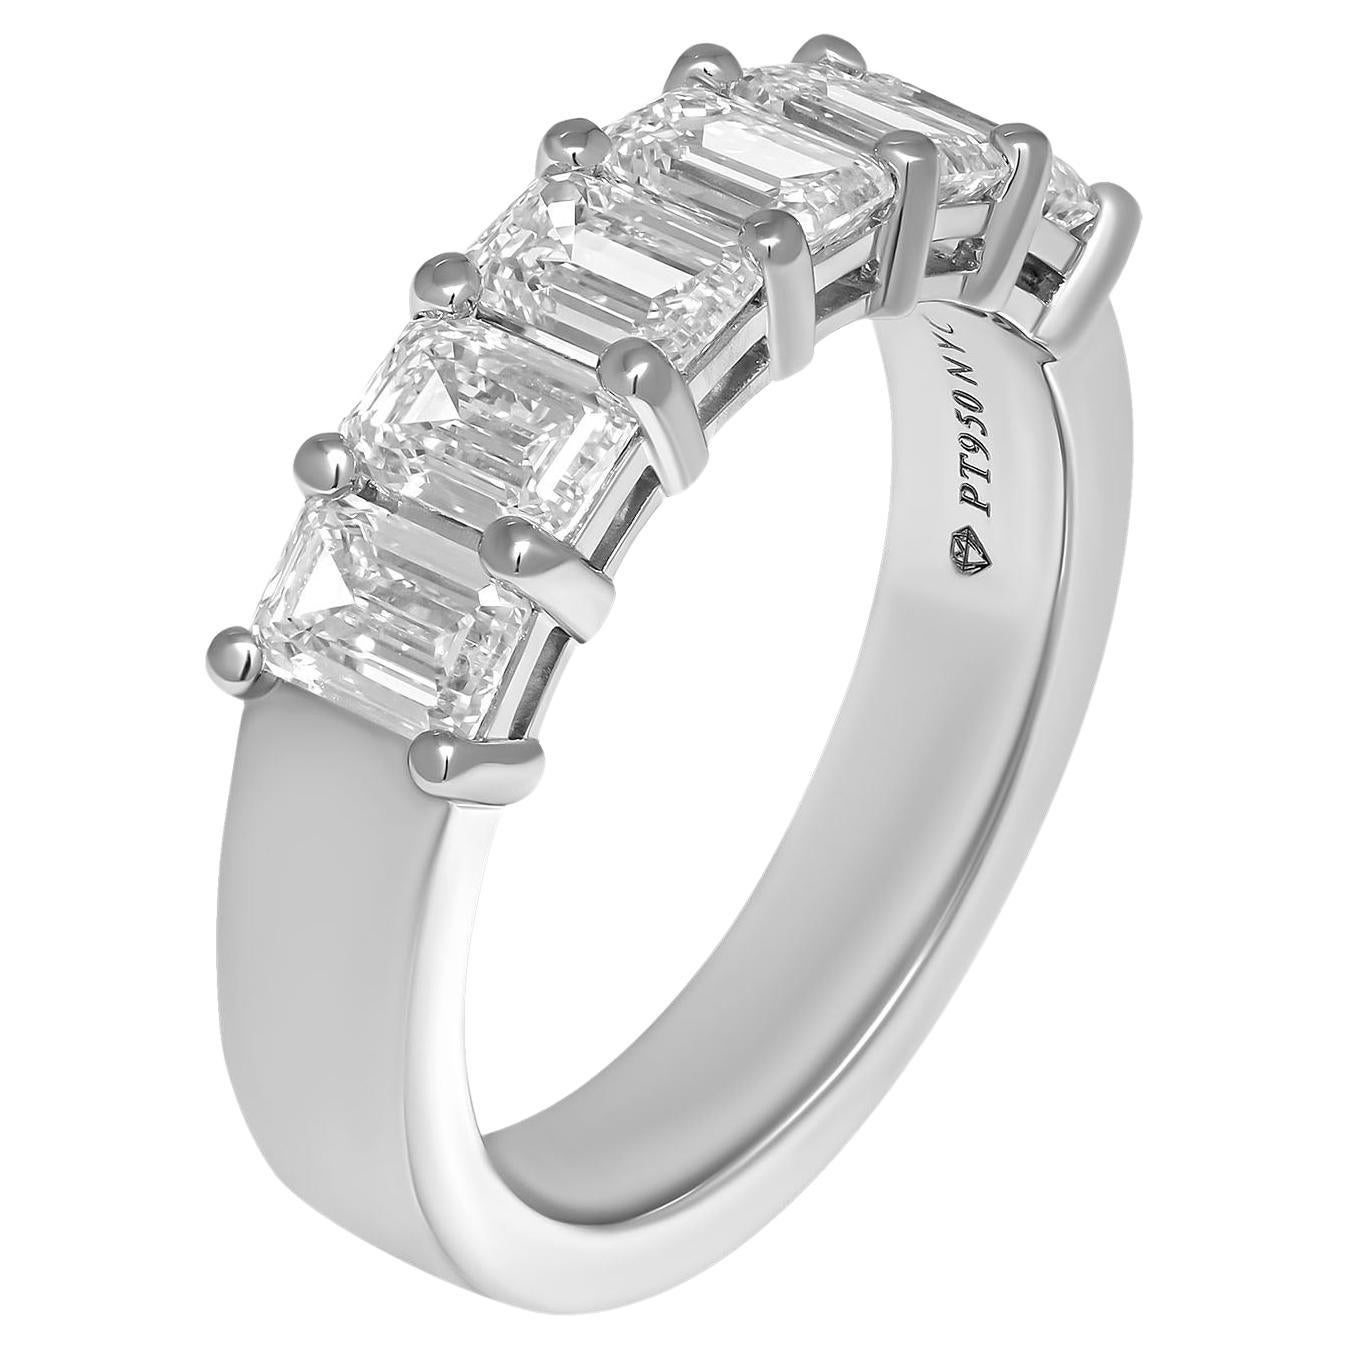 6 Stone GIA Certified Emerald Cut Diamonds 0.30 Ct Each Ring in Platinum For Sale